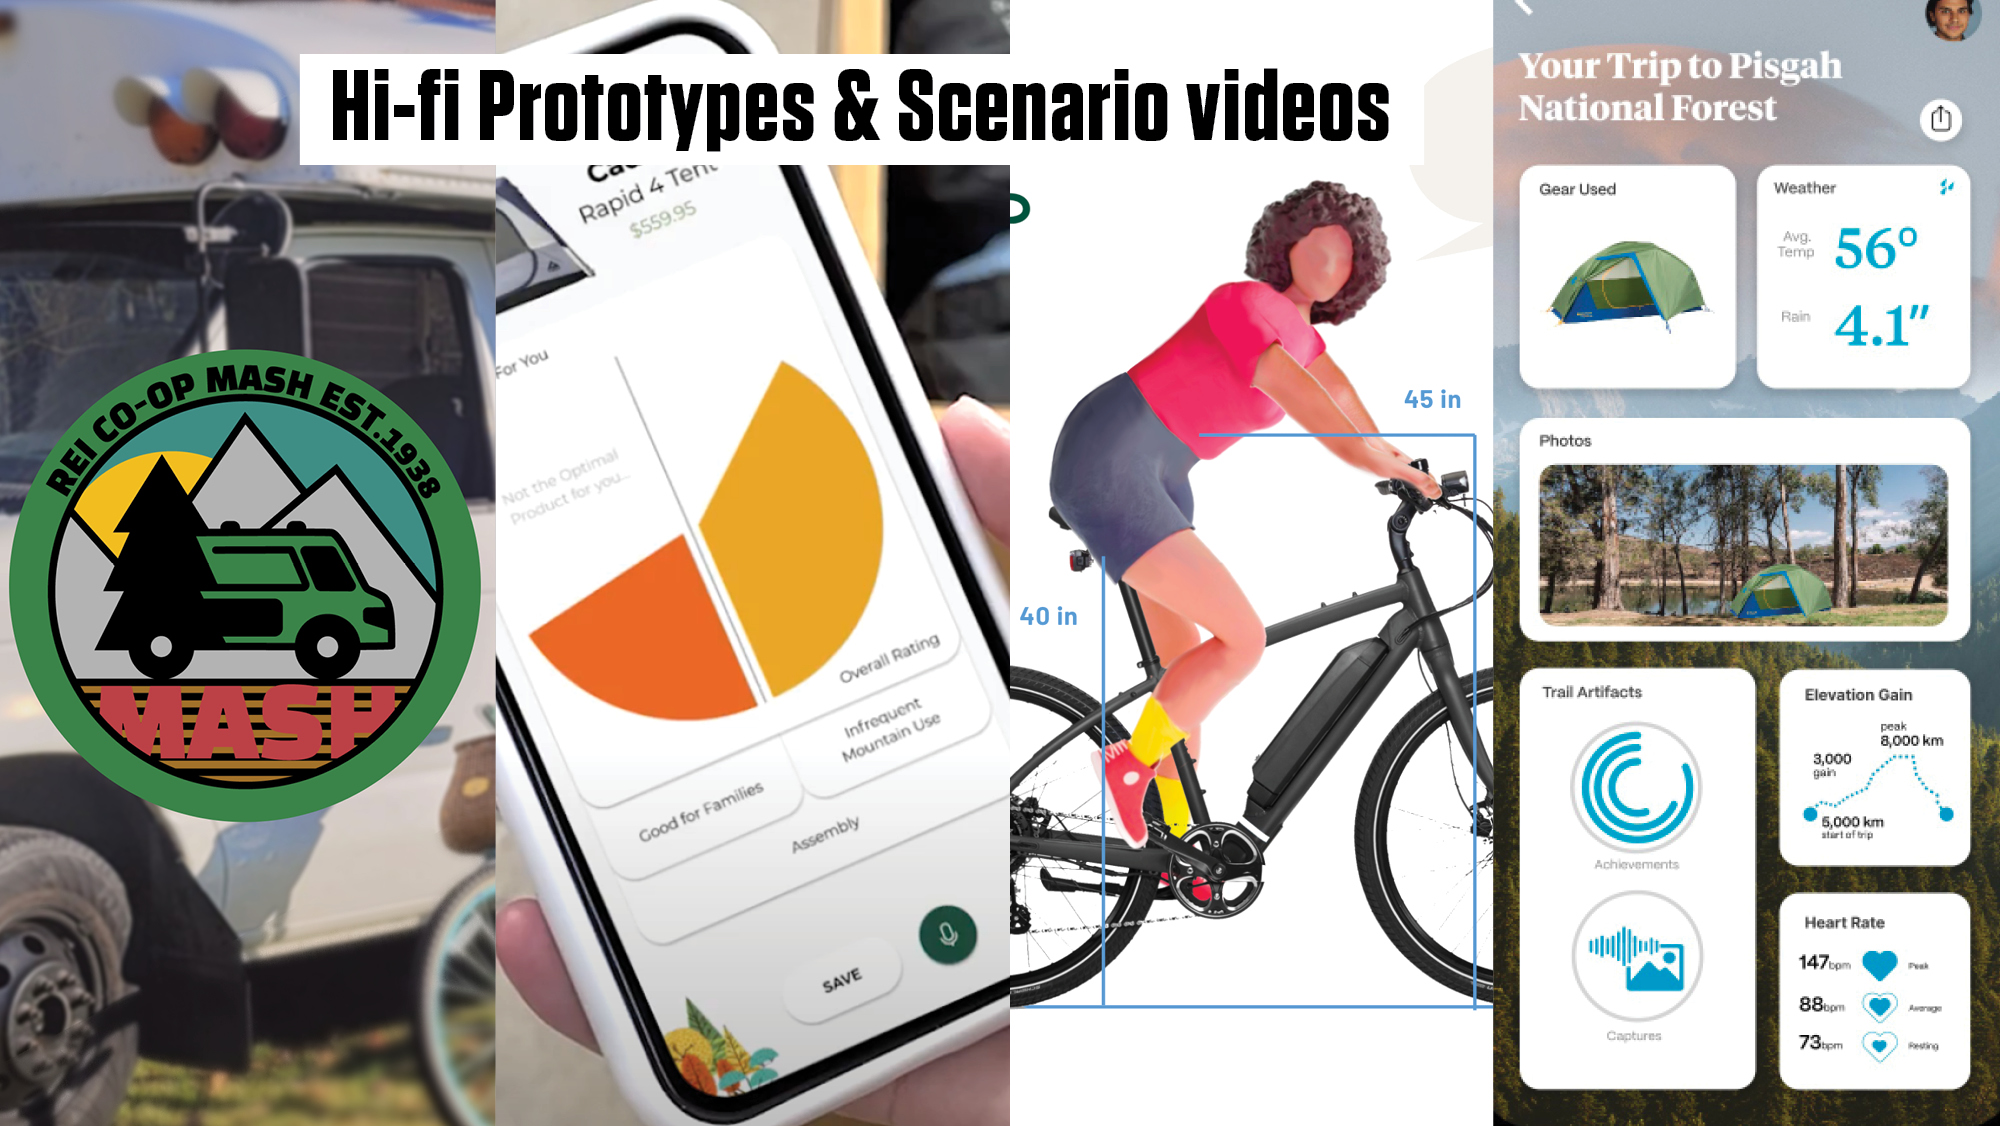 Hi-fi Prototypes & Scenario Videos: several images from the final prototypes: a MASH van, a compatibility rating pie chart, a custom avatar on a bike and a module based trip log detailing elevation climbed, gear used, distance covered